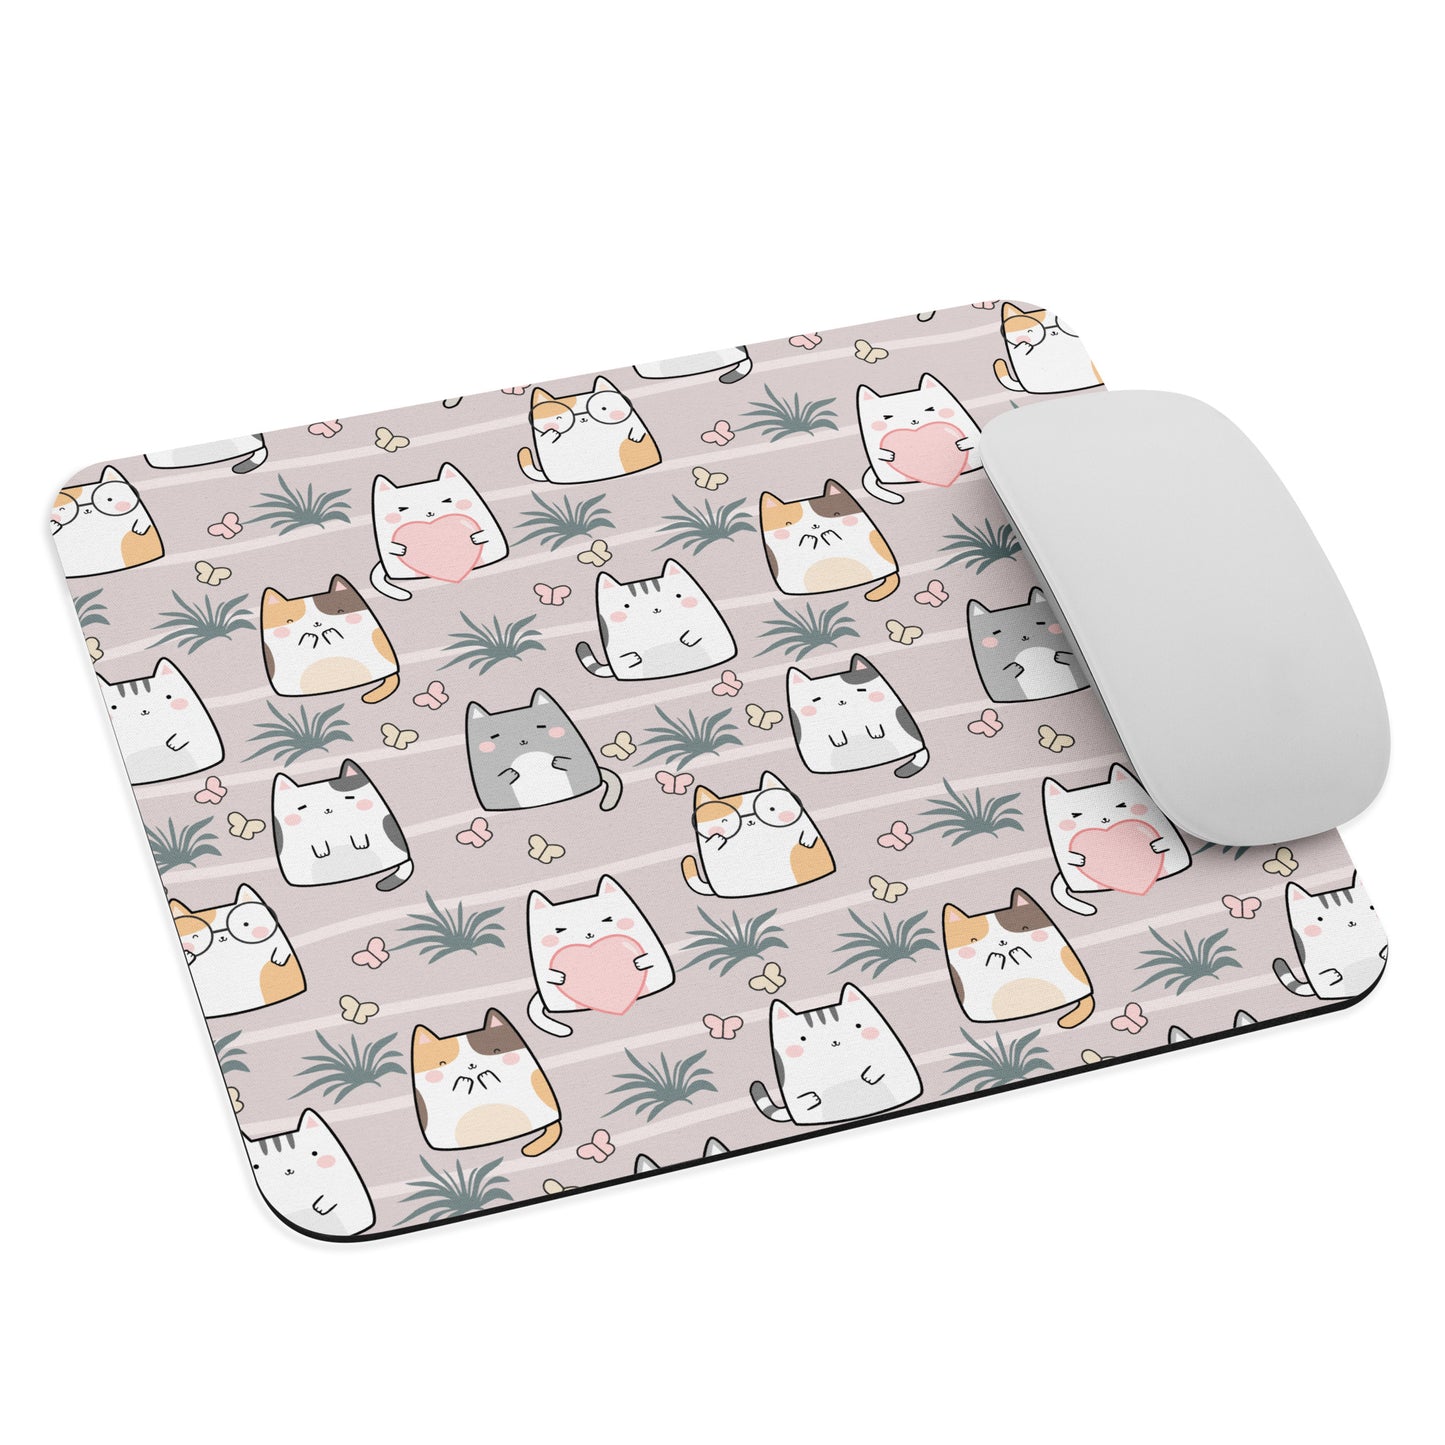 Kitty Pastel Cute Kawaii Gaming Mouse pad, Computer Keyboard Office Accessories, Cute Office Decor